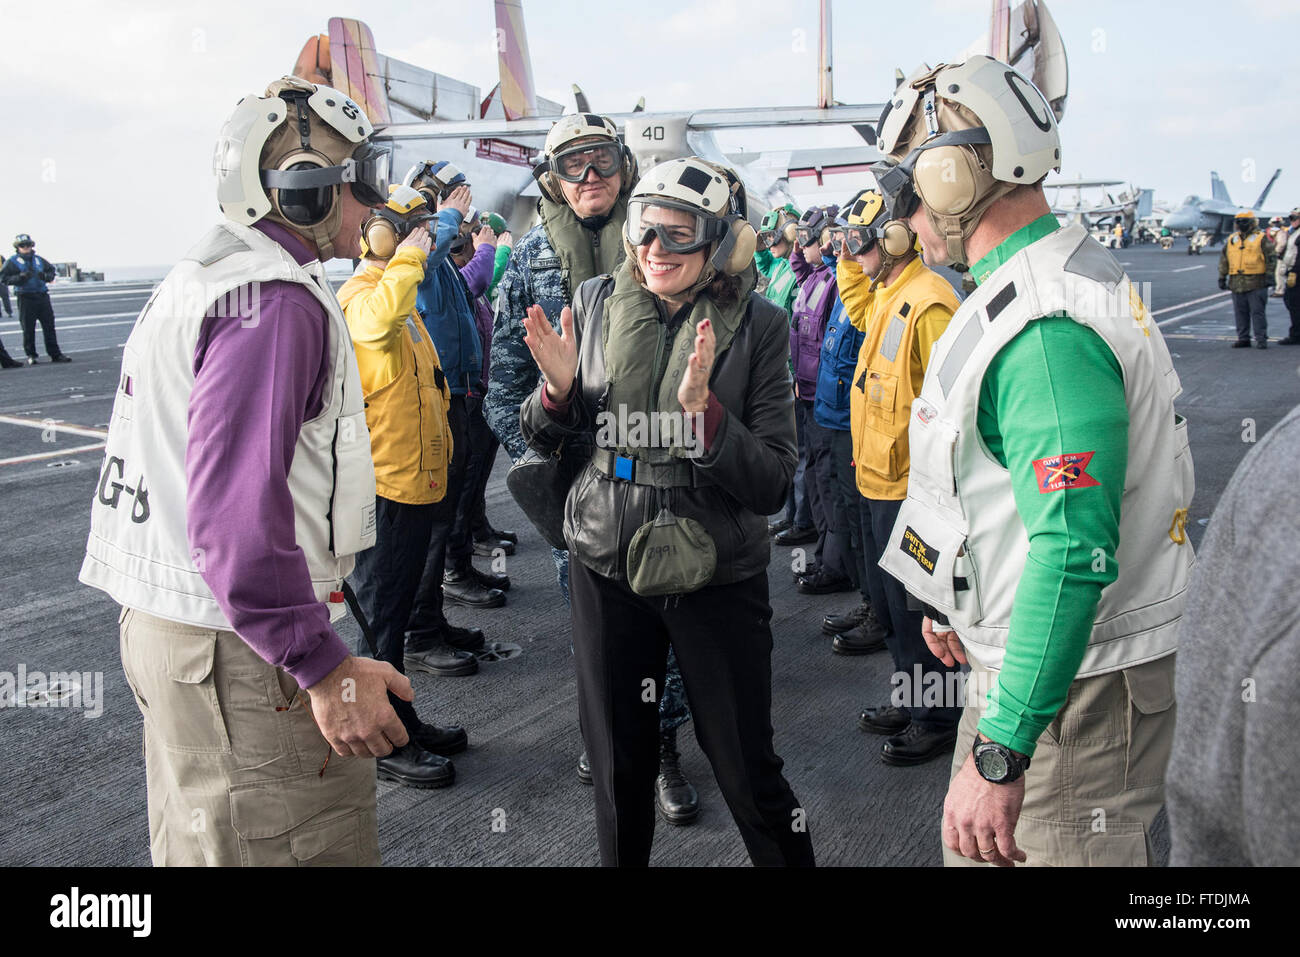 151209-N-DZ642-007 MEDITERRANEAN SEA (Dec. 9, 2015) Julieta Valls Noyes, U.S. Ambassador to Croatia, is welcomed aboard aircraft carrier USS Harry S. Truman (CVN 75) by Rear Adm. Bret Batchelder, commander, Carrier Strike Group Eight, left, and Capt. Ryan Scholl, Truman's commanding officer, right. Harry S. Truman Carrier Strike Group is conducting naval operations in the U.S. 6th Fleet area of operations in support of U.S. national security interests in Europe and Africa. (U.S. Navy photo by Mass Communication Specialist 3rd Class B. Siens/Released) Stock Photo